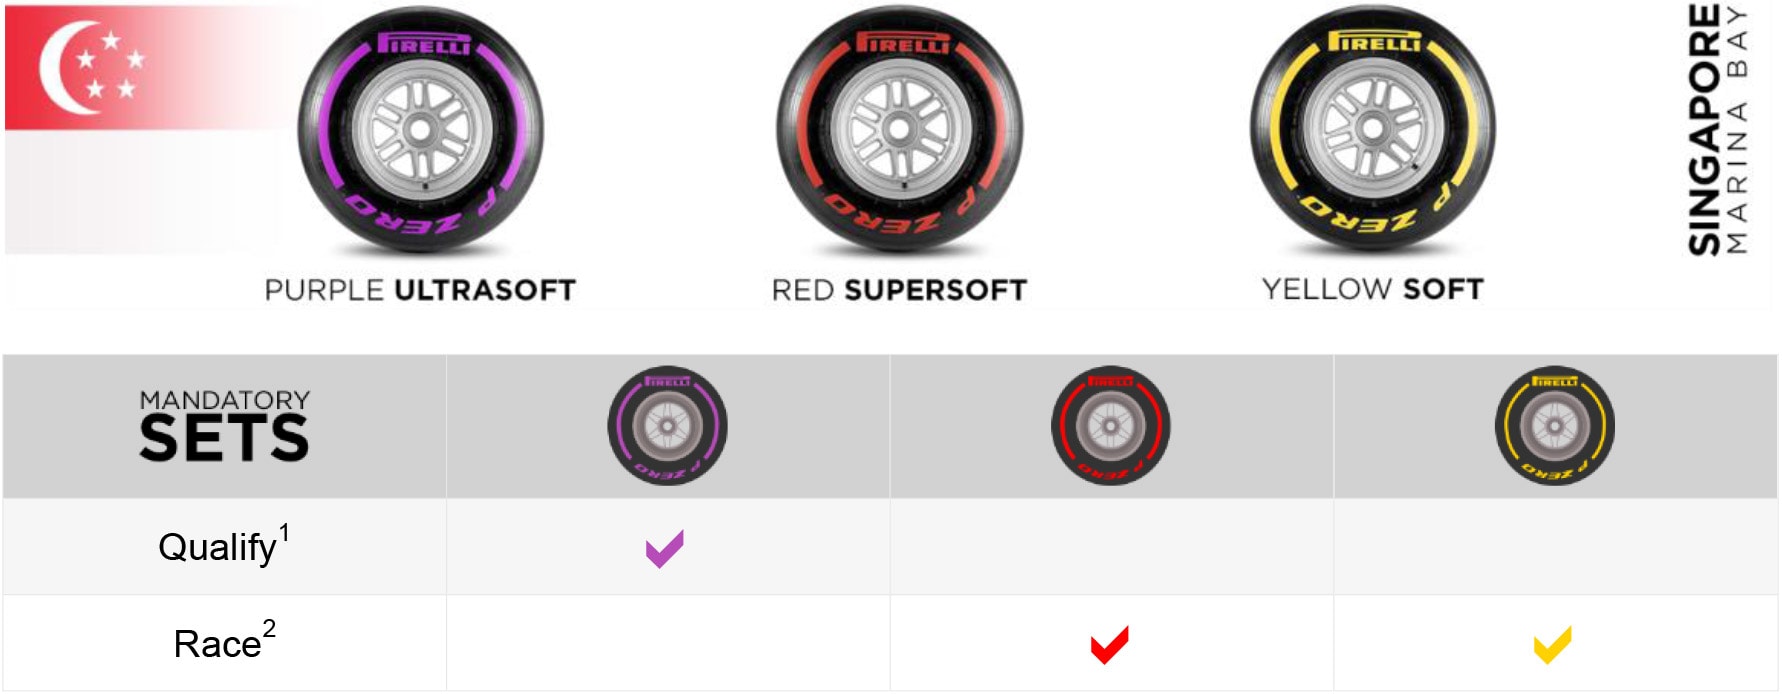 Ultrasoft, supersoft and soft tyres for Singapore